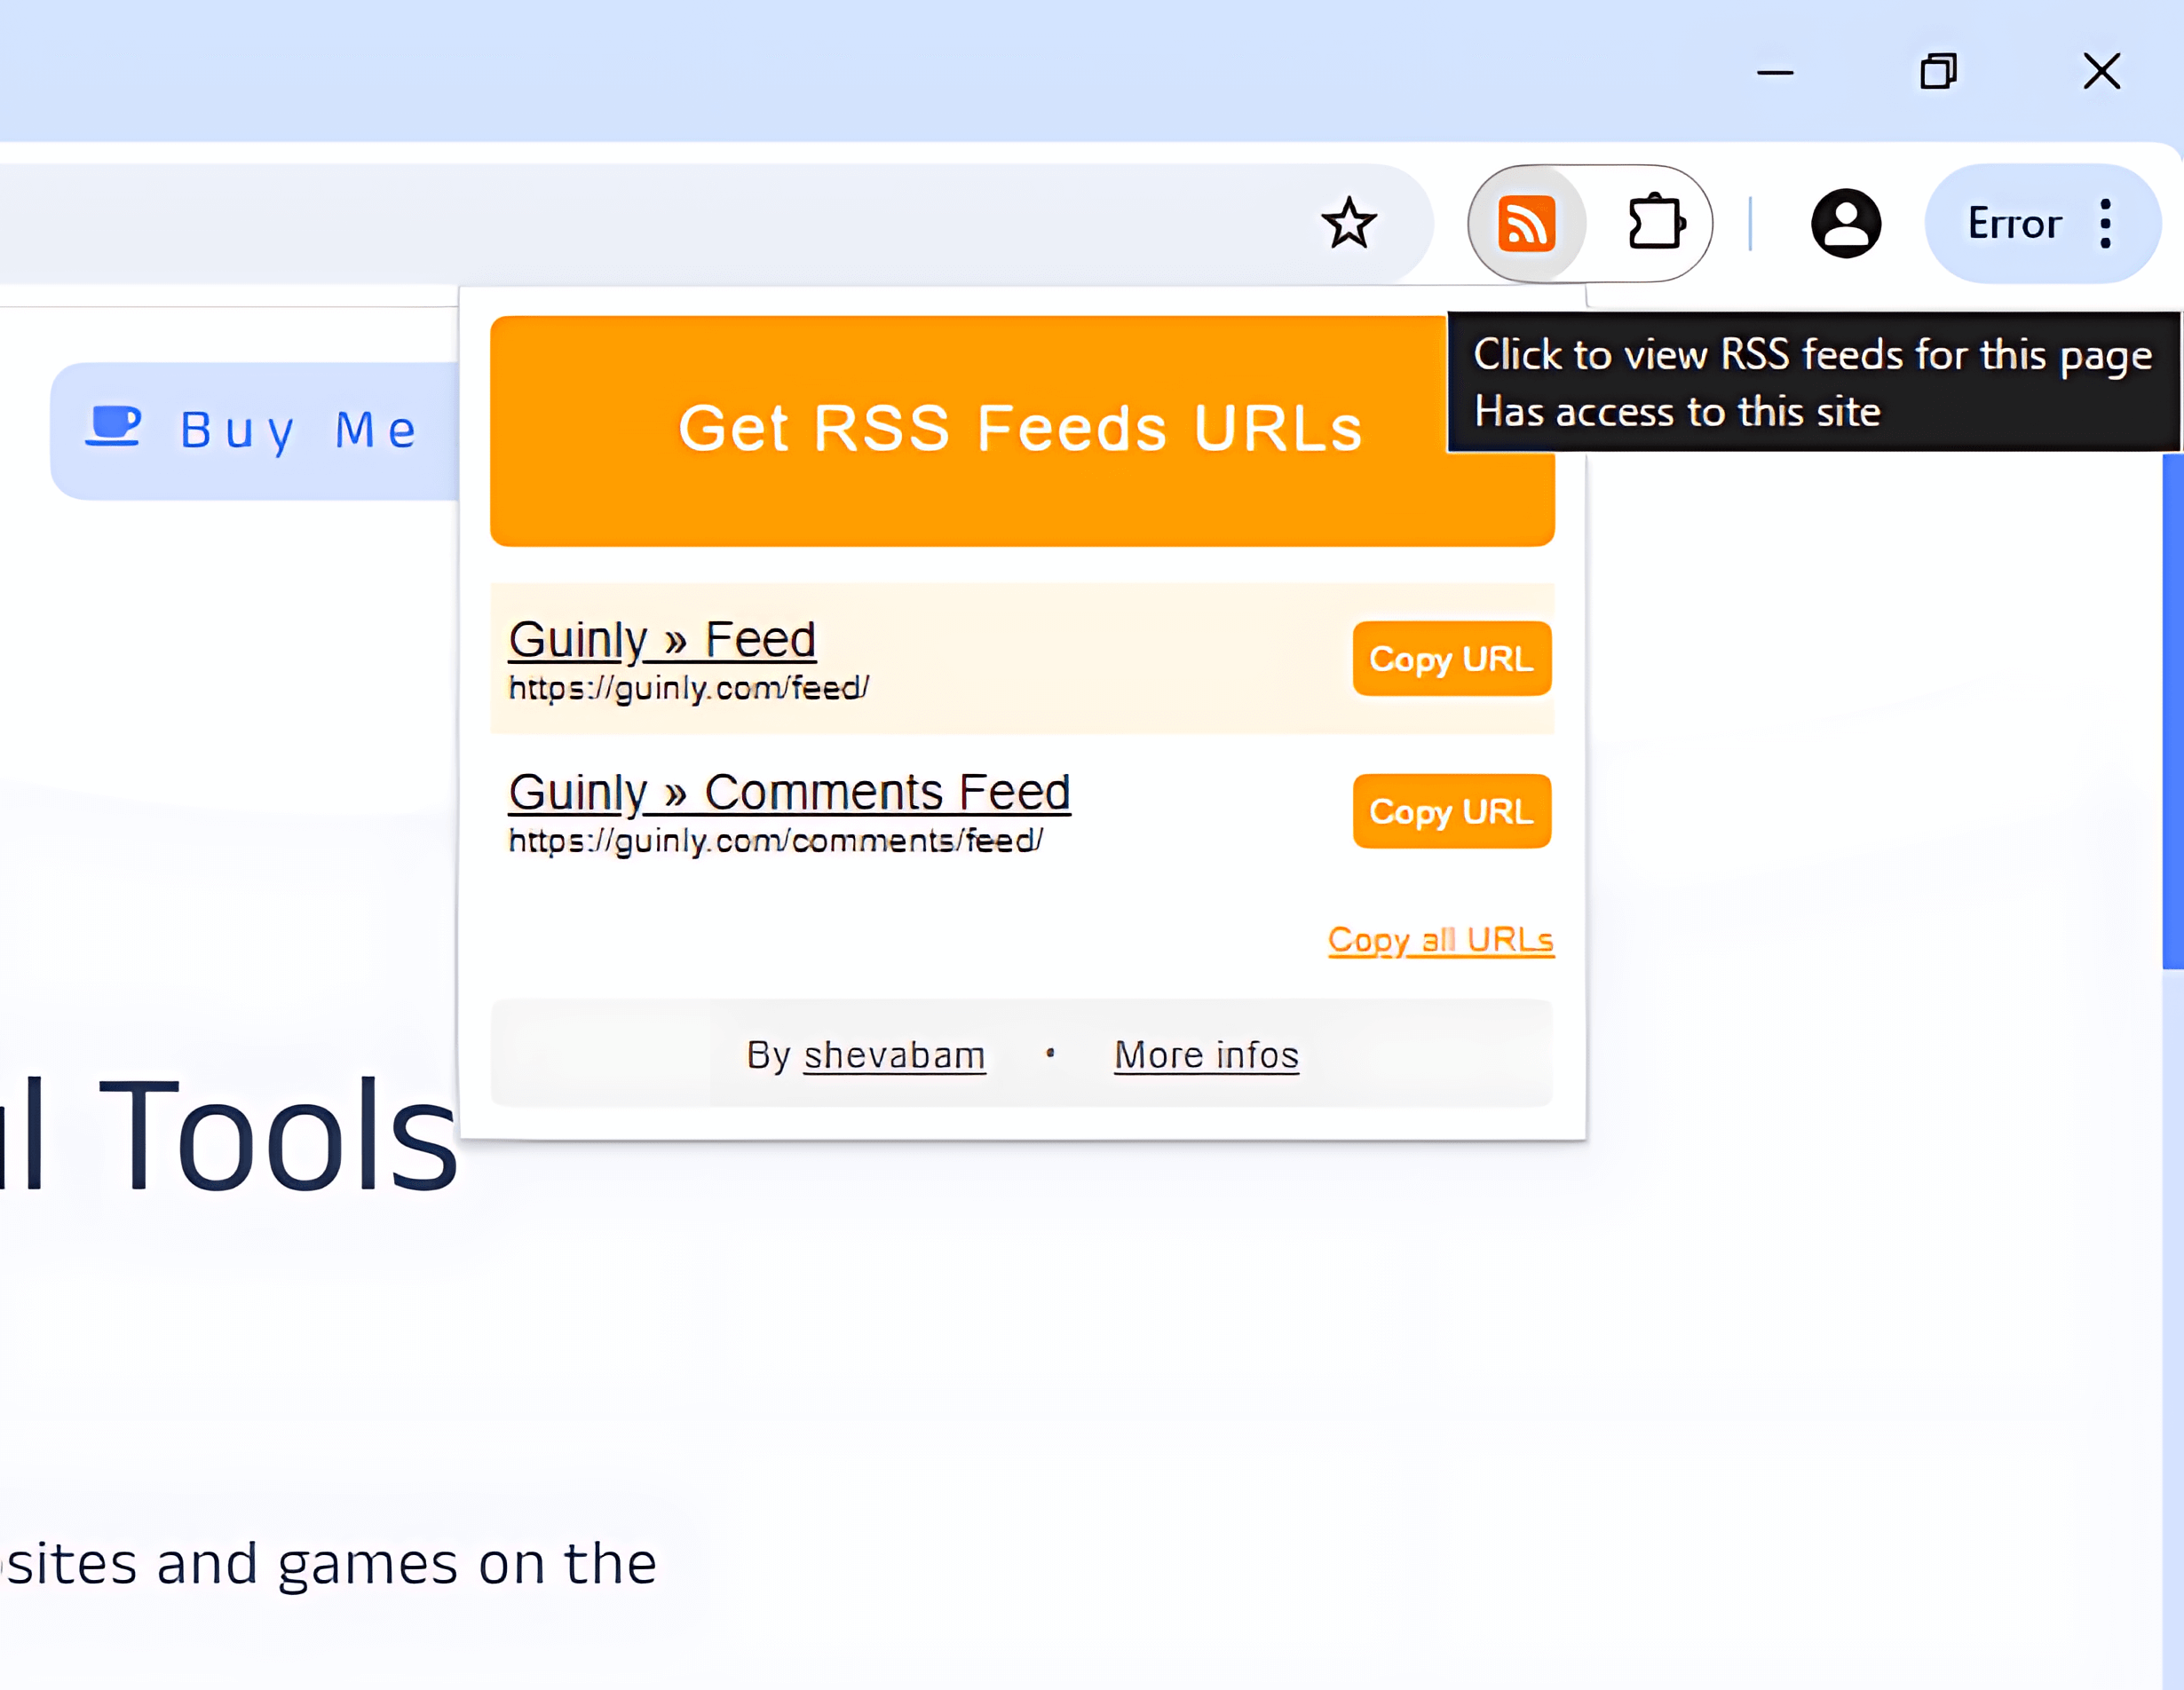 How To Find The RSS Feed URL For Any Site5